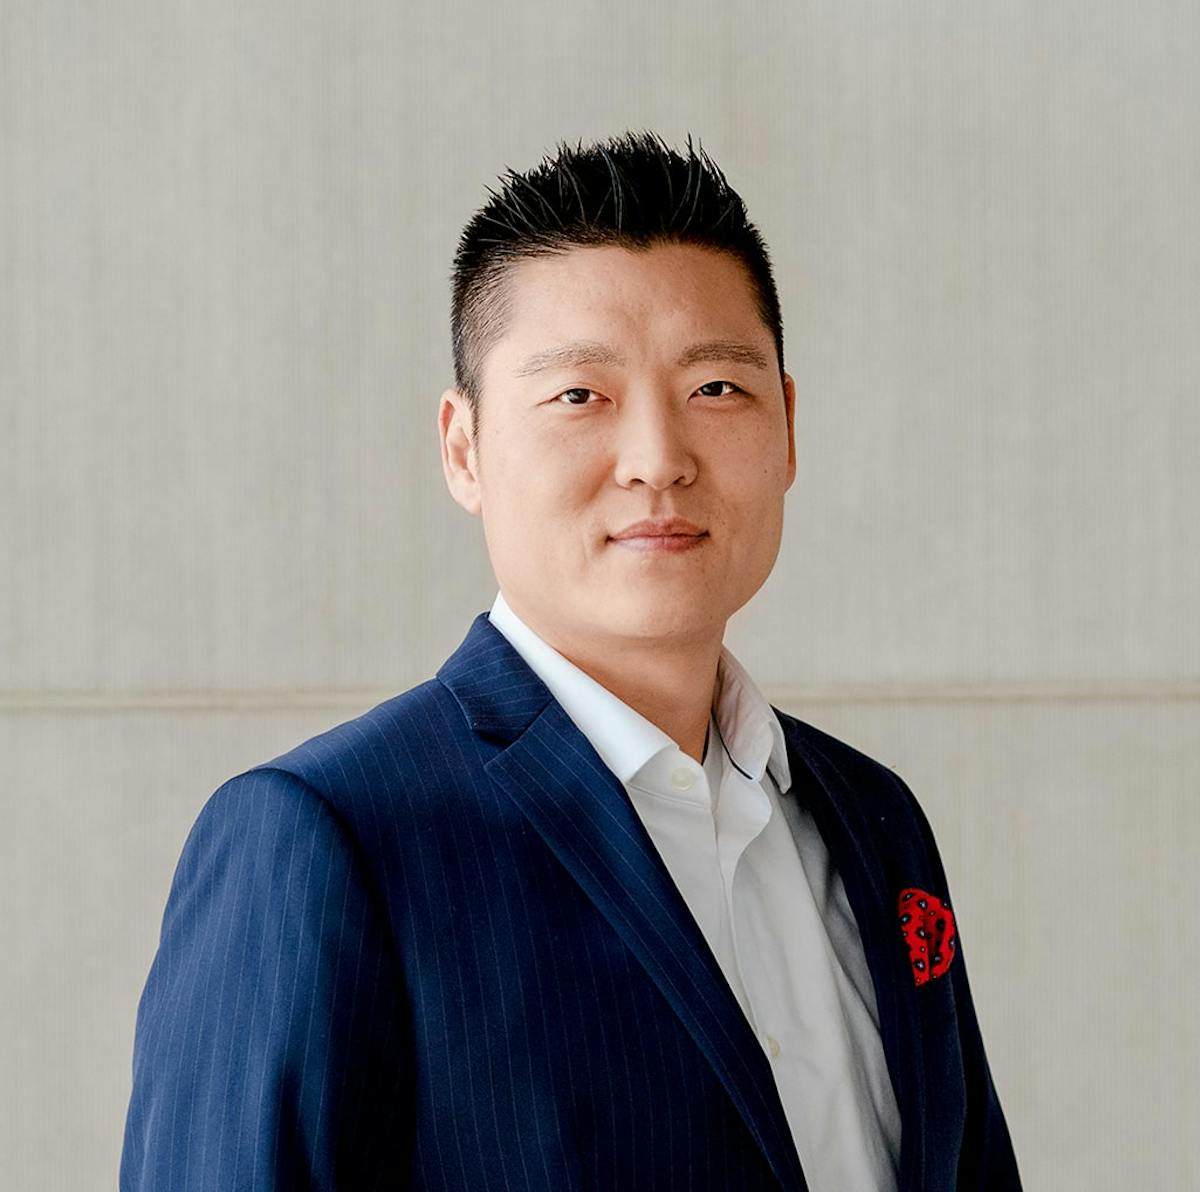 John Shin is the Managing Director at RSI Security and has 18 years of leadership, management and Information Technology experience. He is a Certified Information Systems Security Professional, CISM, and Project Management Professional (PMP).